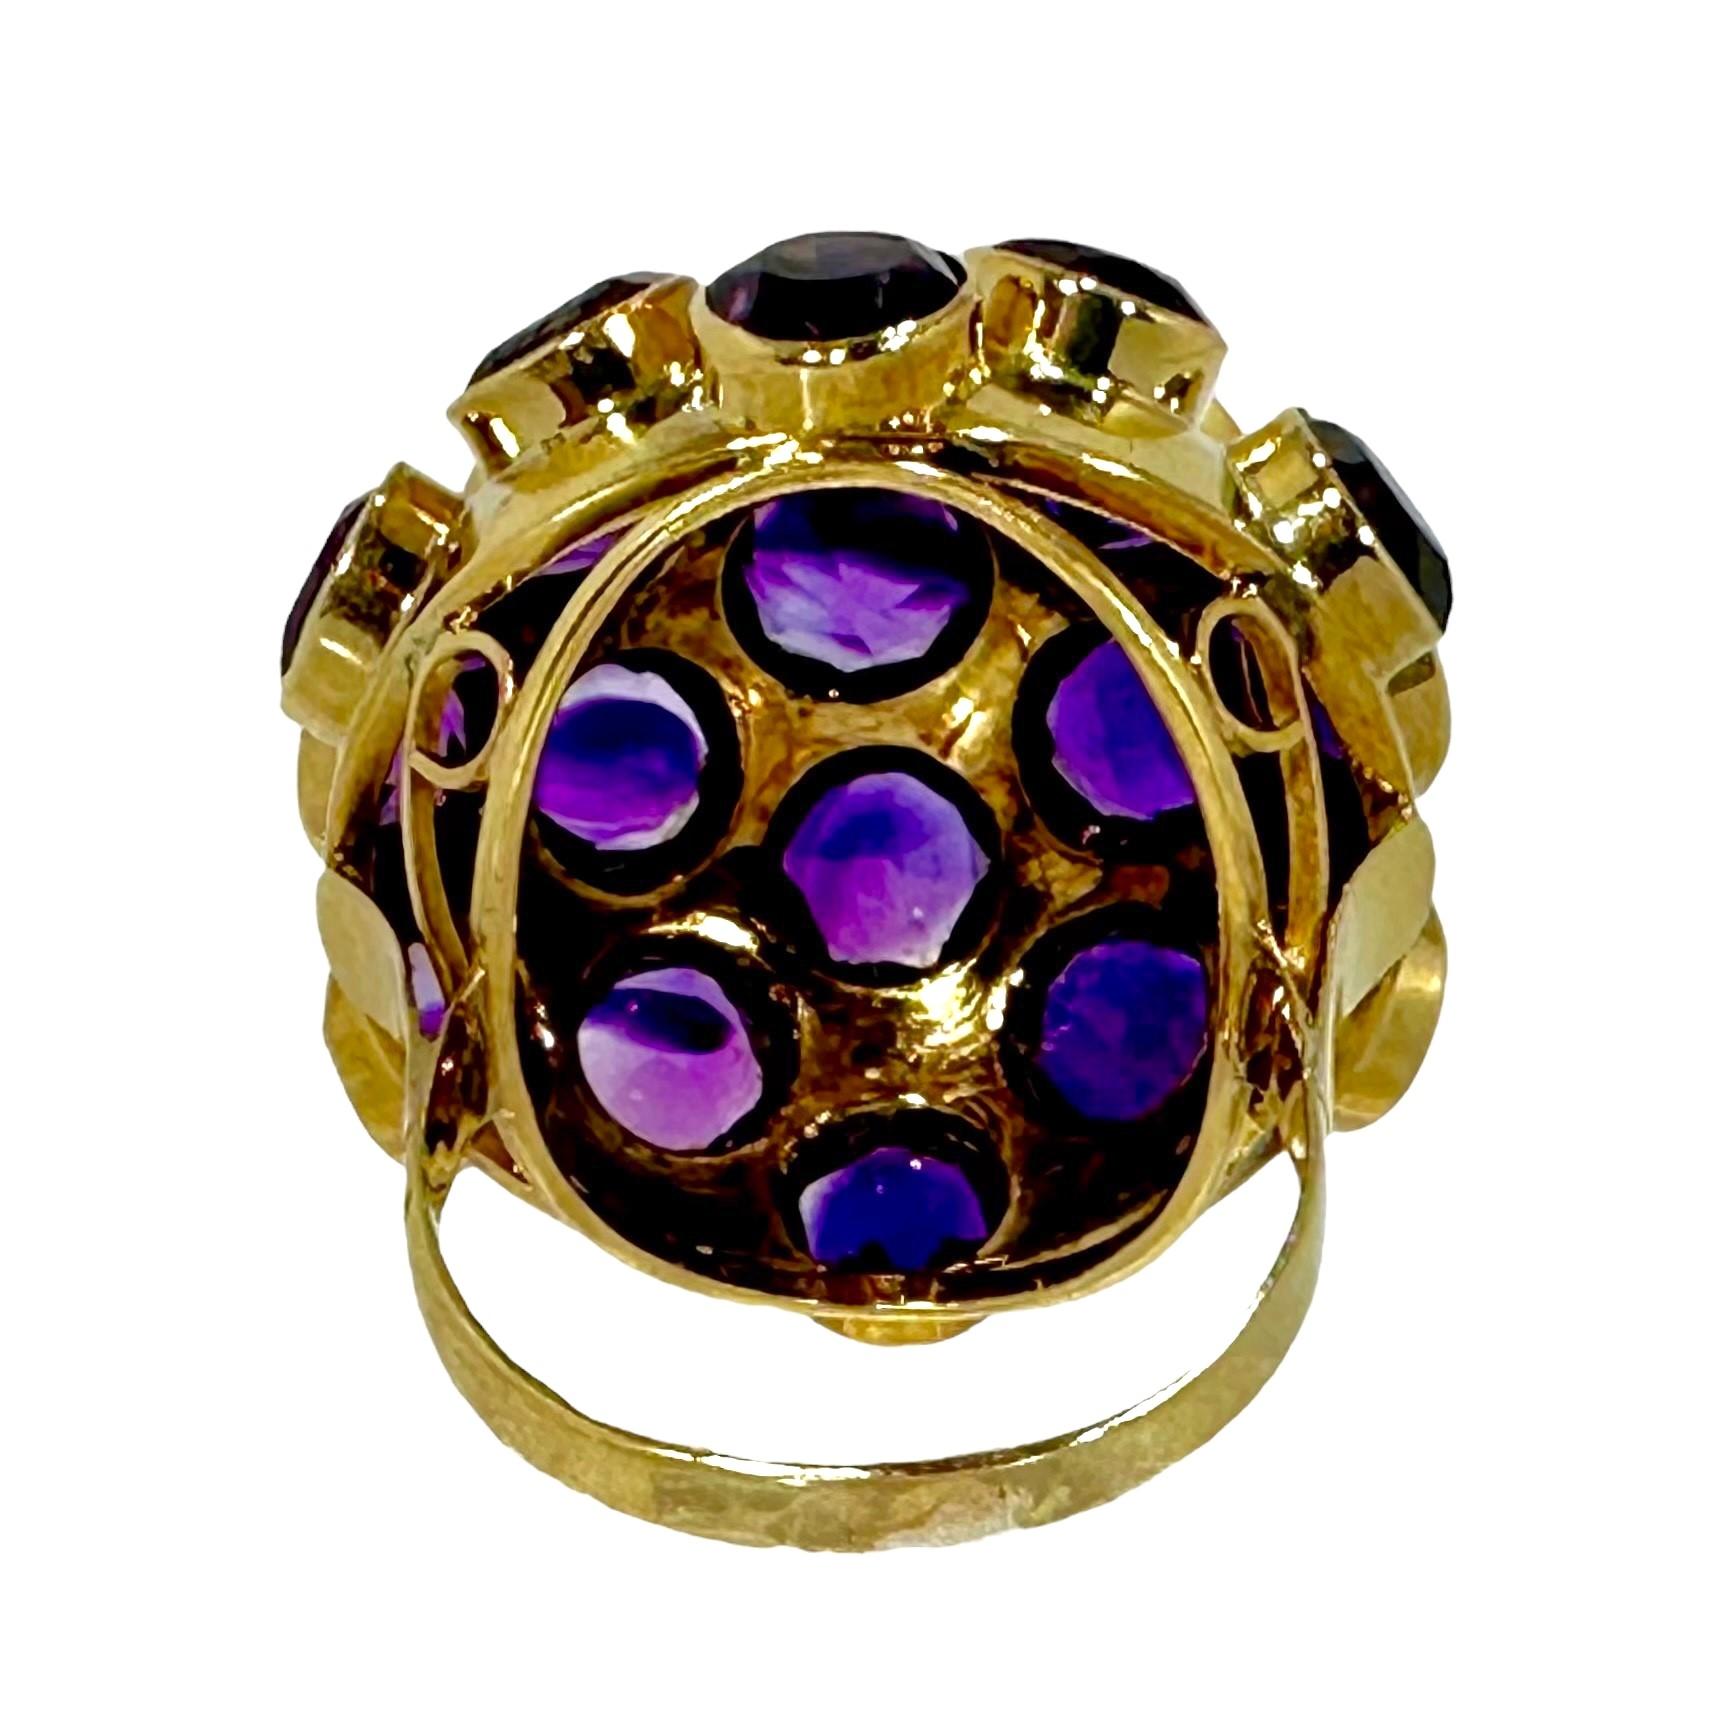 Brilliant Cut Mid-20th Century 18k Yellow Gold and All Amethyst Large Sputnik Dome Ring   For Sale